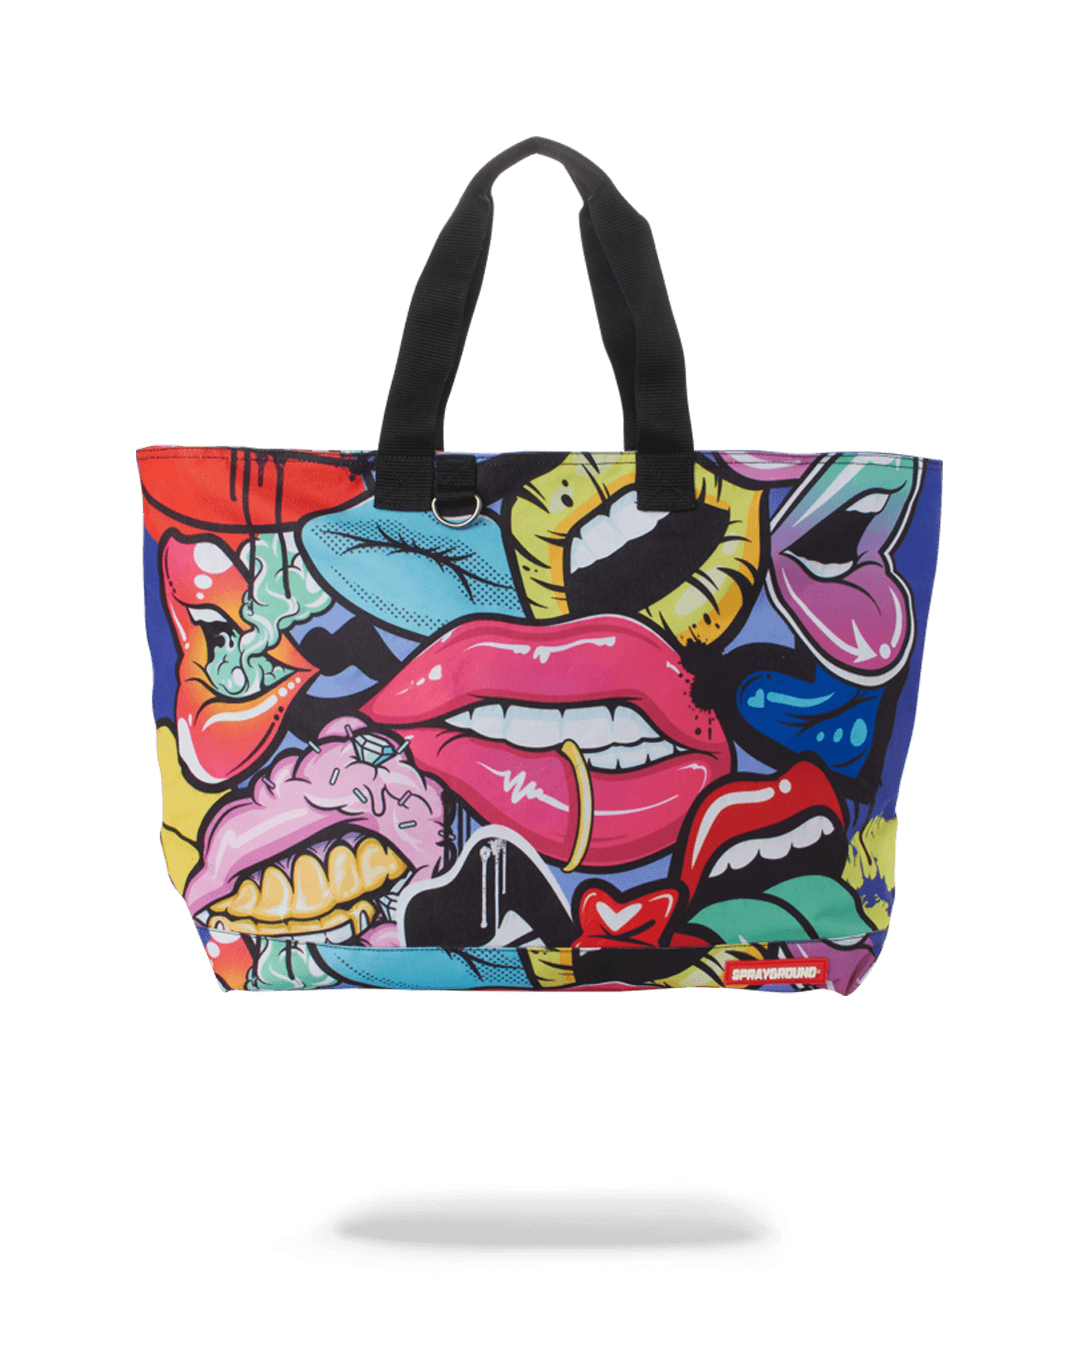 LIP SERVICE BEACH TOTE - HIGH QUALITY AND INEXPENSIVE - LIP SERVICE BEACH TOTE HIGH QUALITY AND INEXPENSIVE-01-0